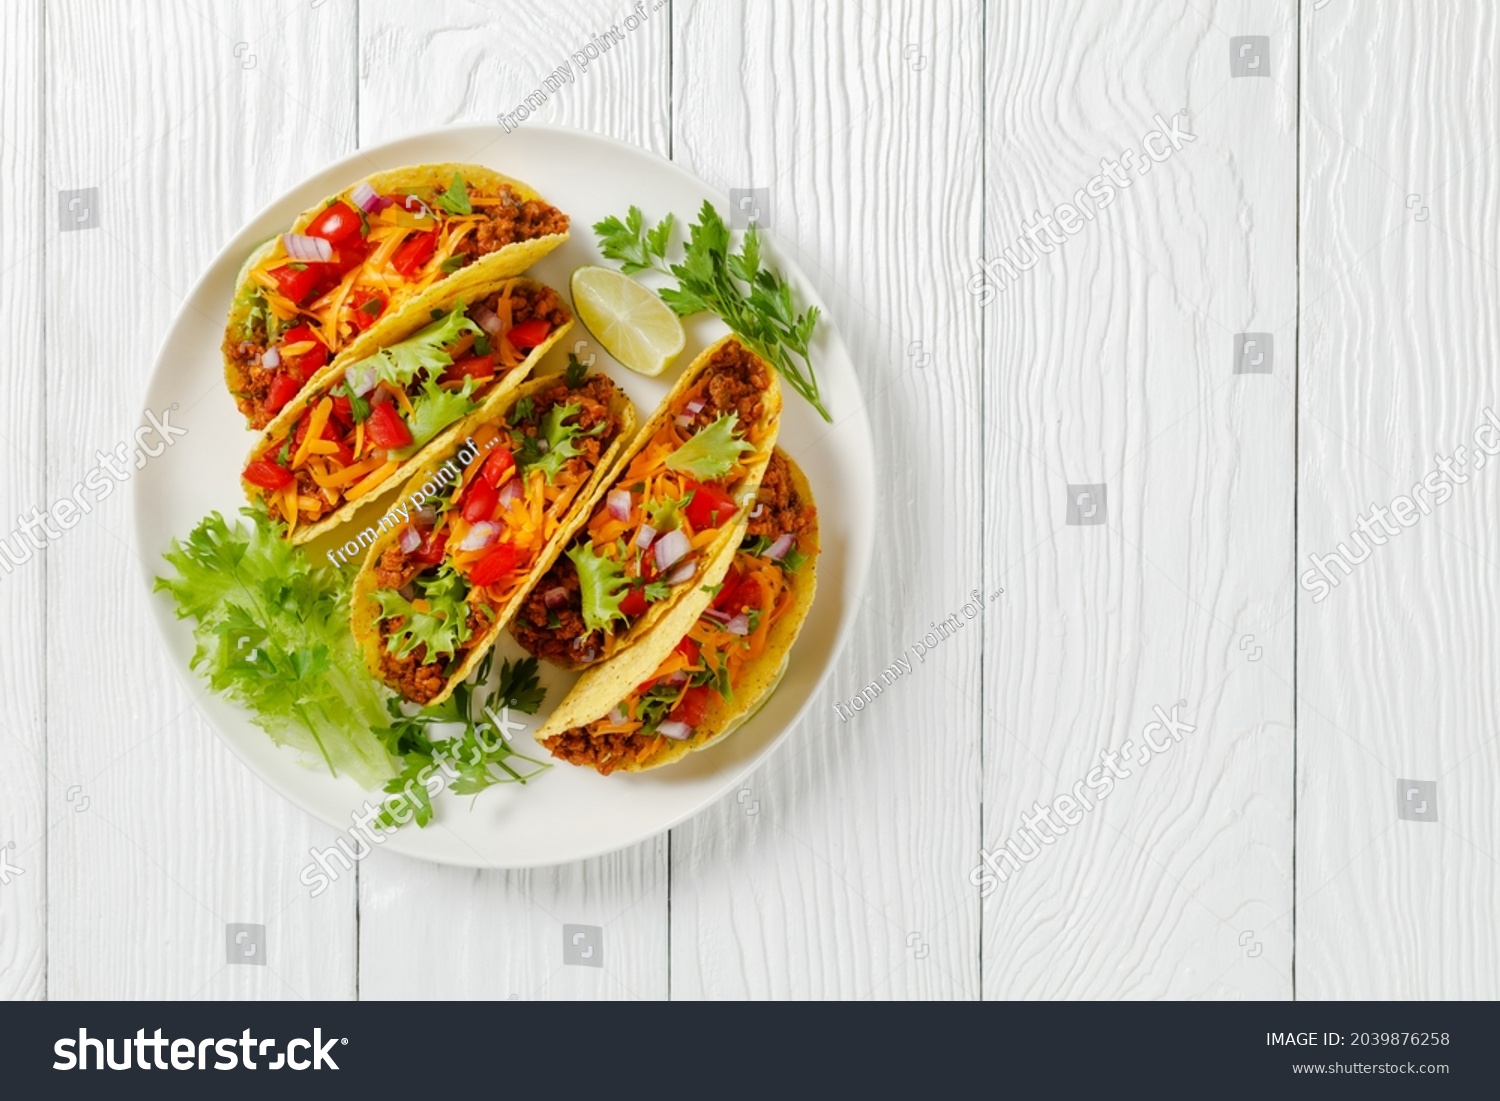 Ground Beef Tacos Shredded Cheddar Cheese Stock Photo 2039876258 ...